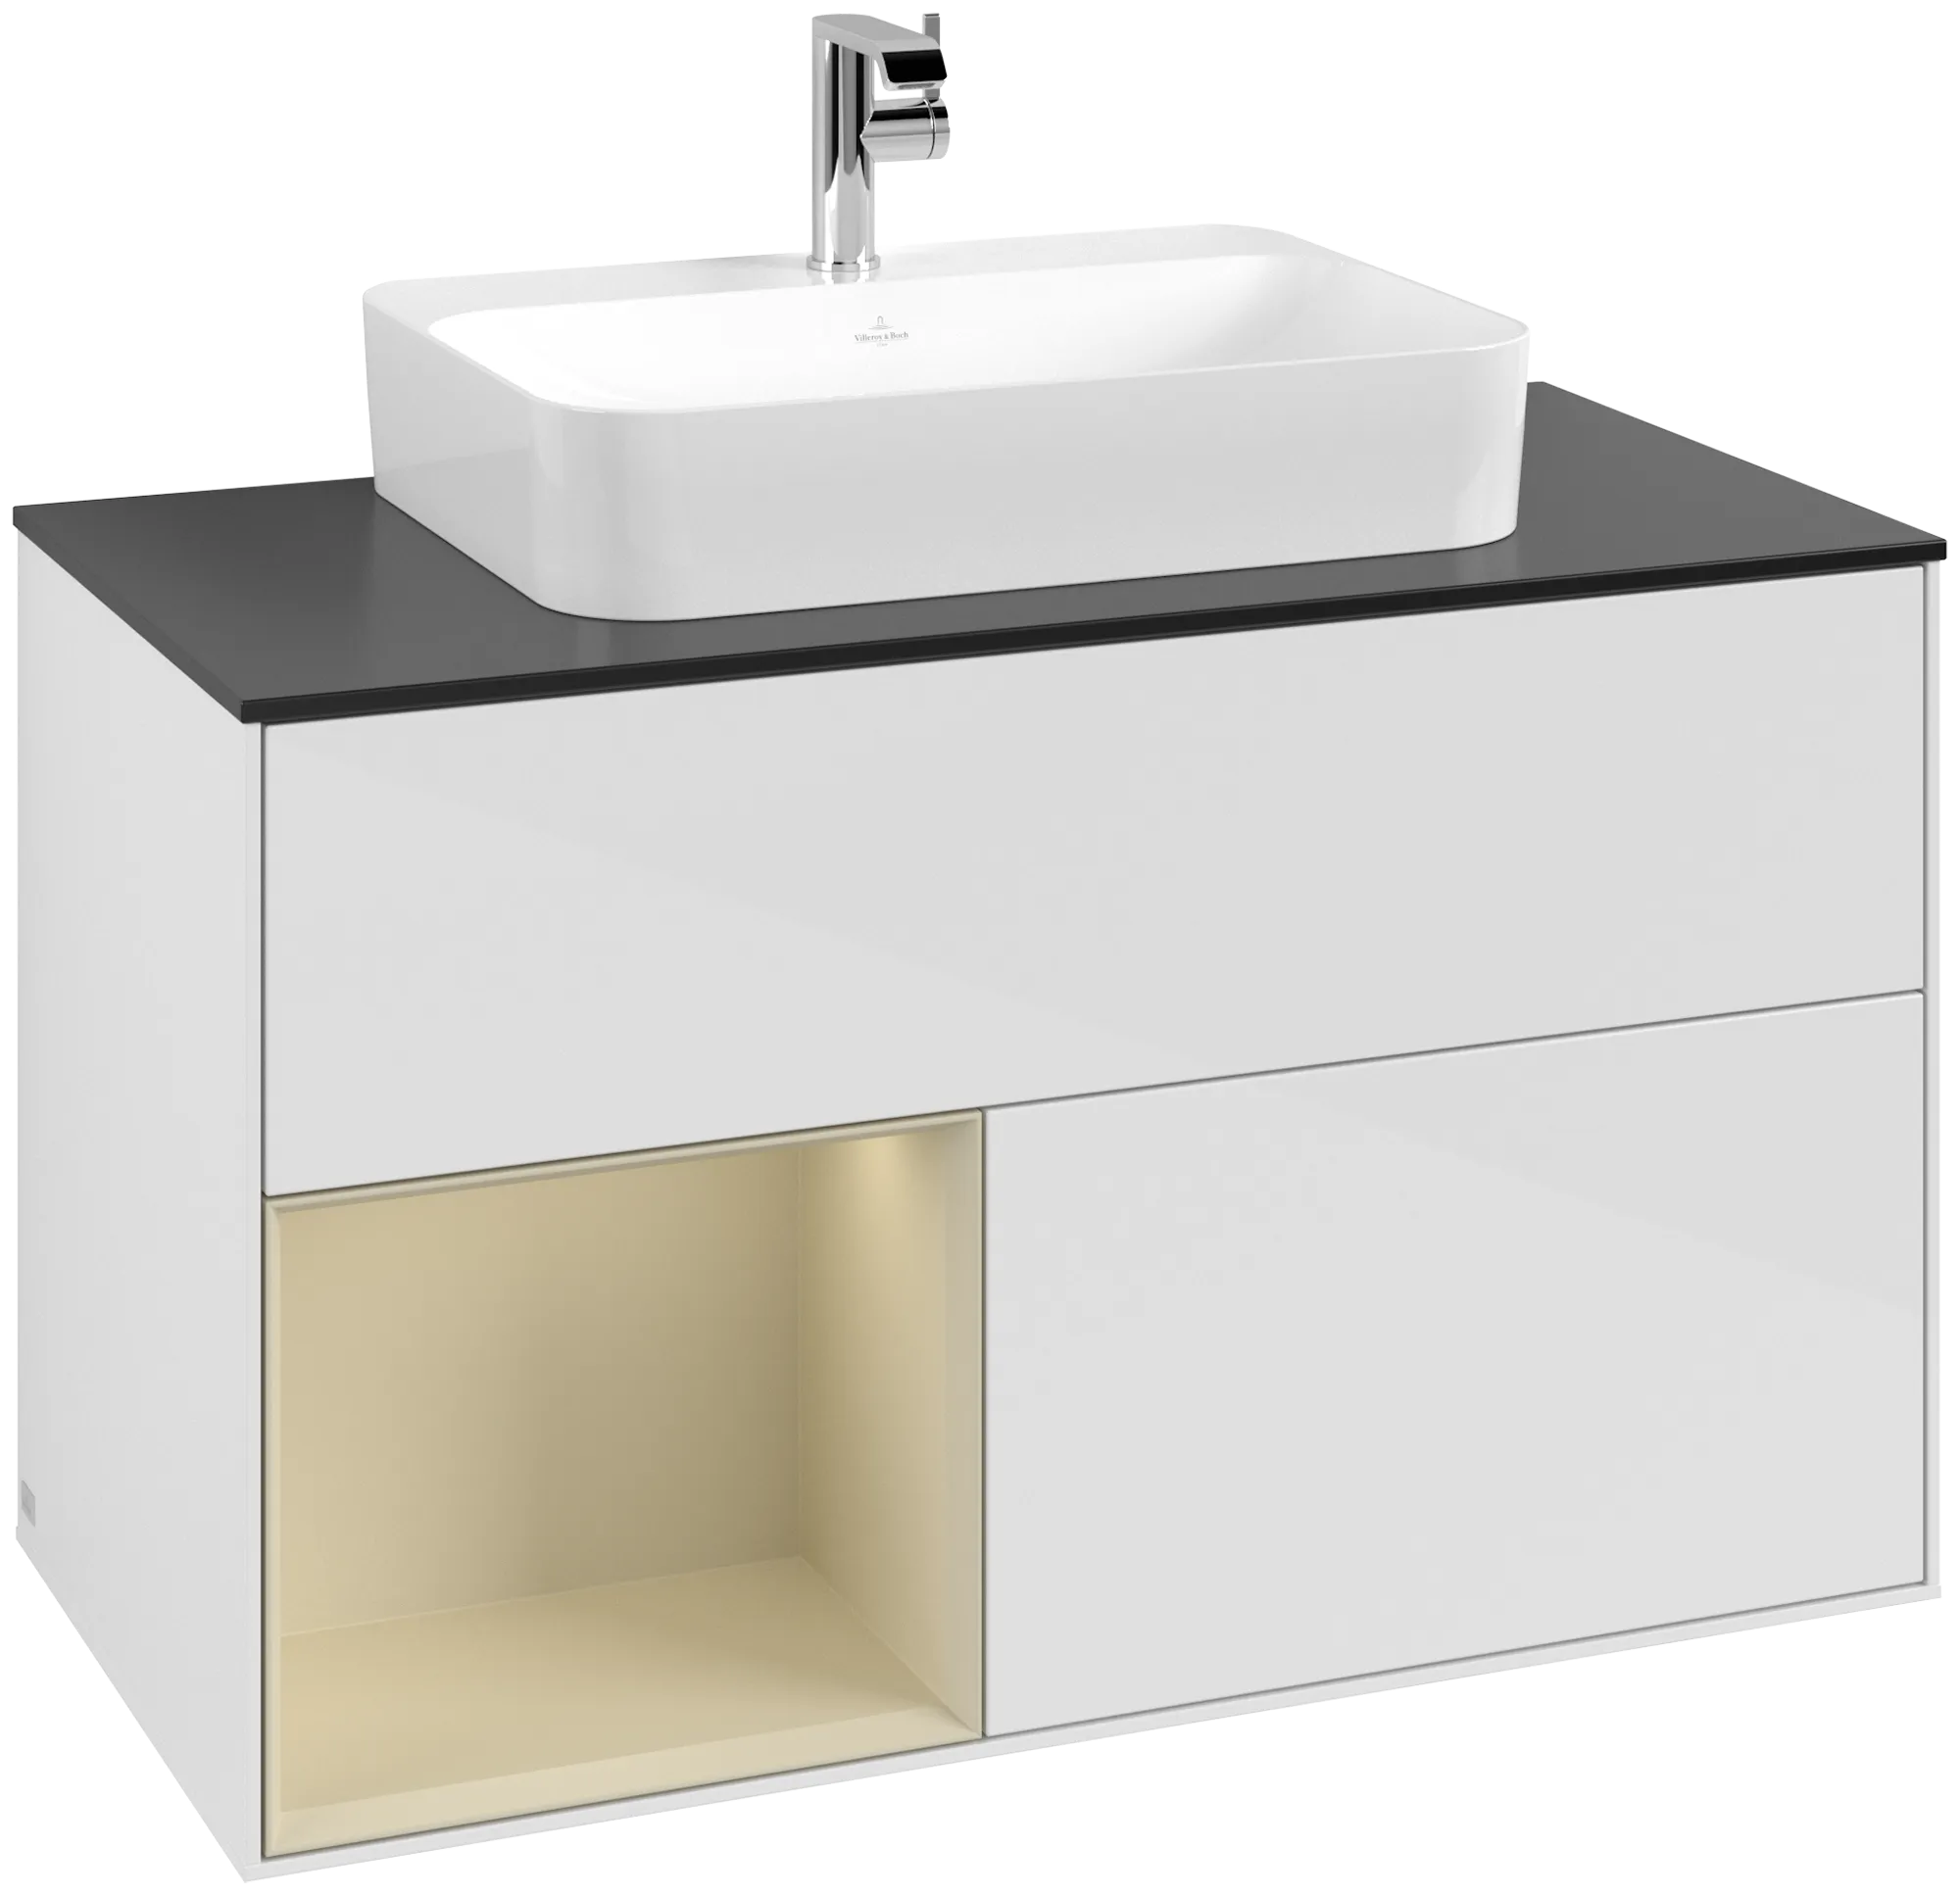 Picture of VILLEROY BOCH Finion Vanity unit, with lighting, 2 pull-out compartments, 1000 x 603 x 501 mm, Glossy White Lacquer / Silk Grey Matt Lacquer / Glass Black Matt #G362HJGF